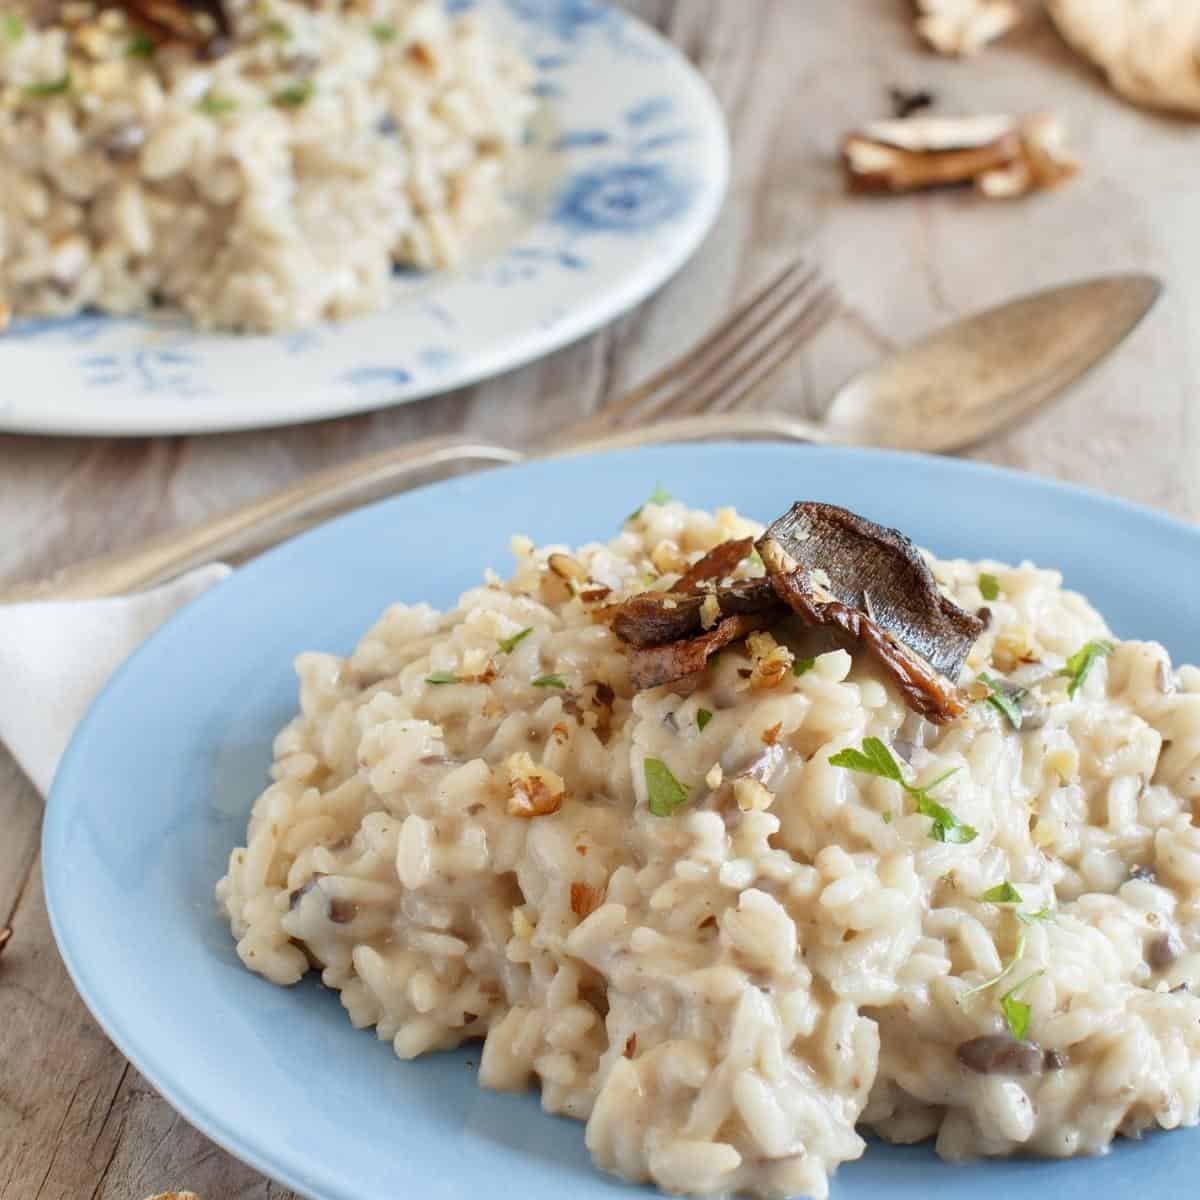 a plate of risotto on a blue plate sitting on a wooden table